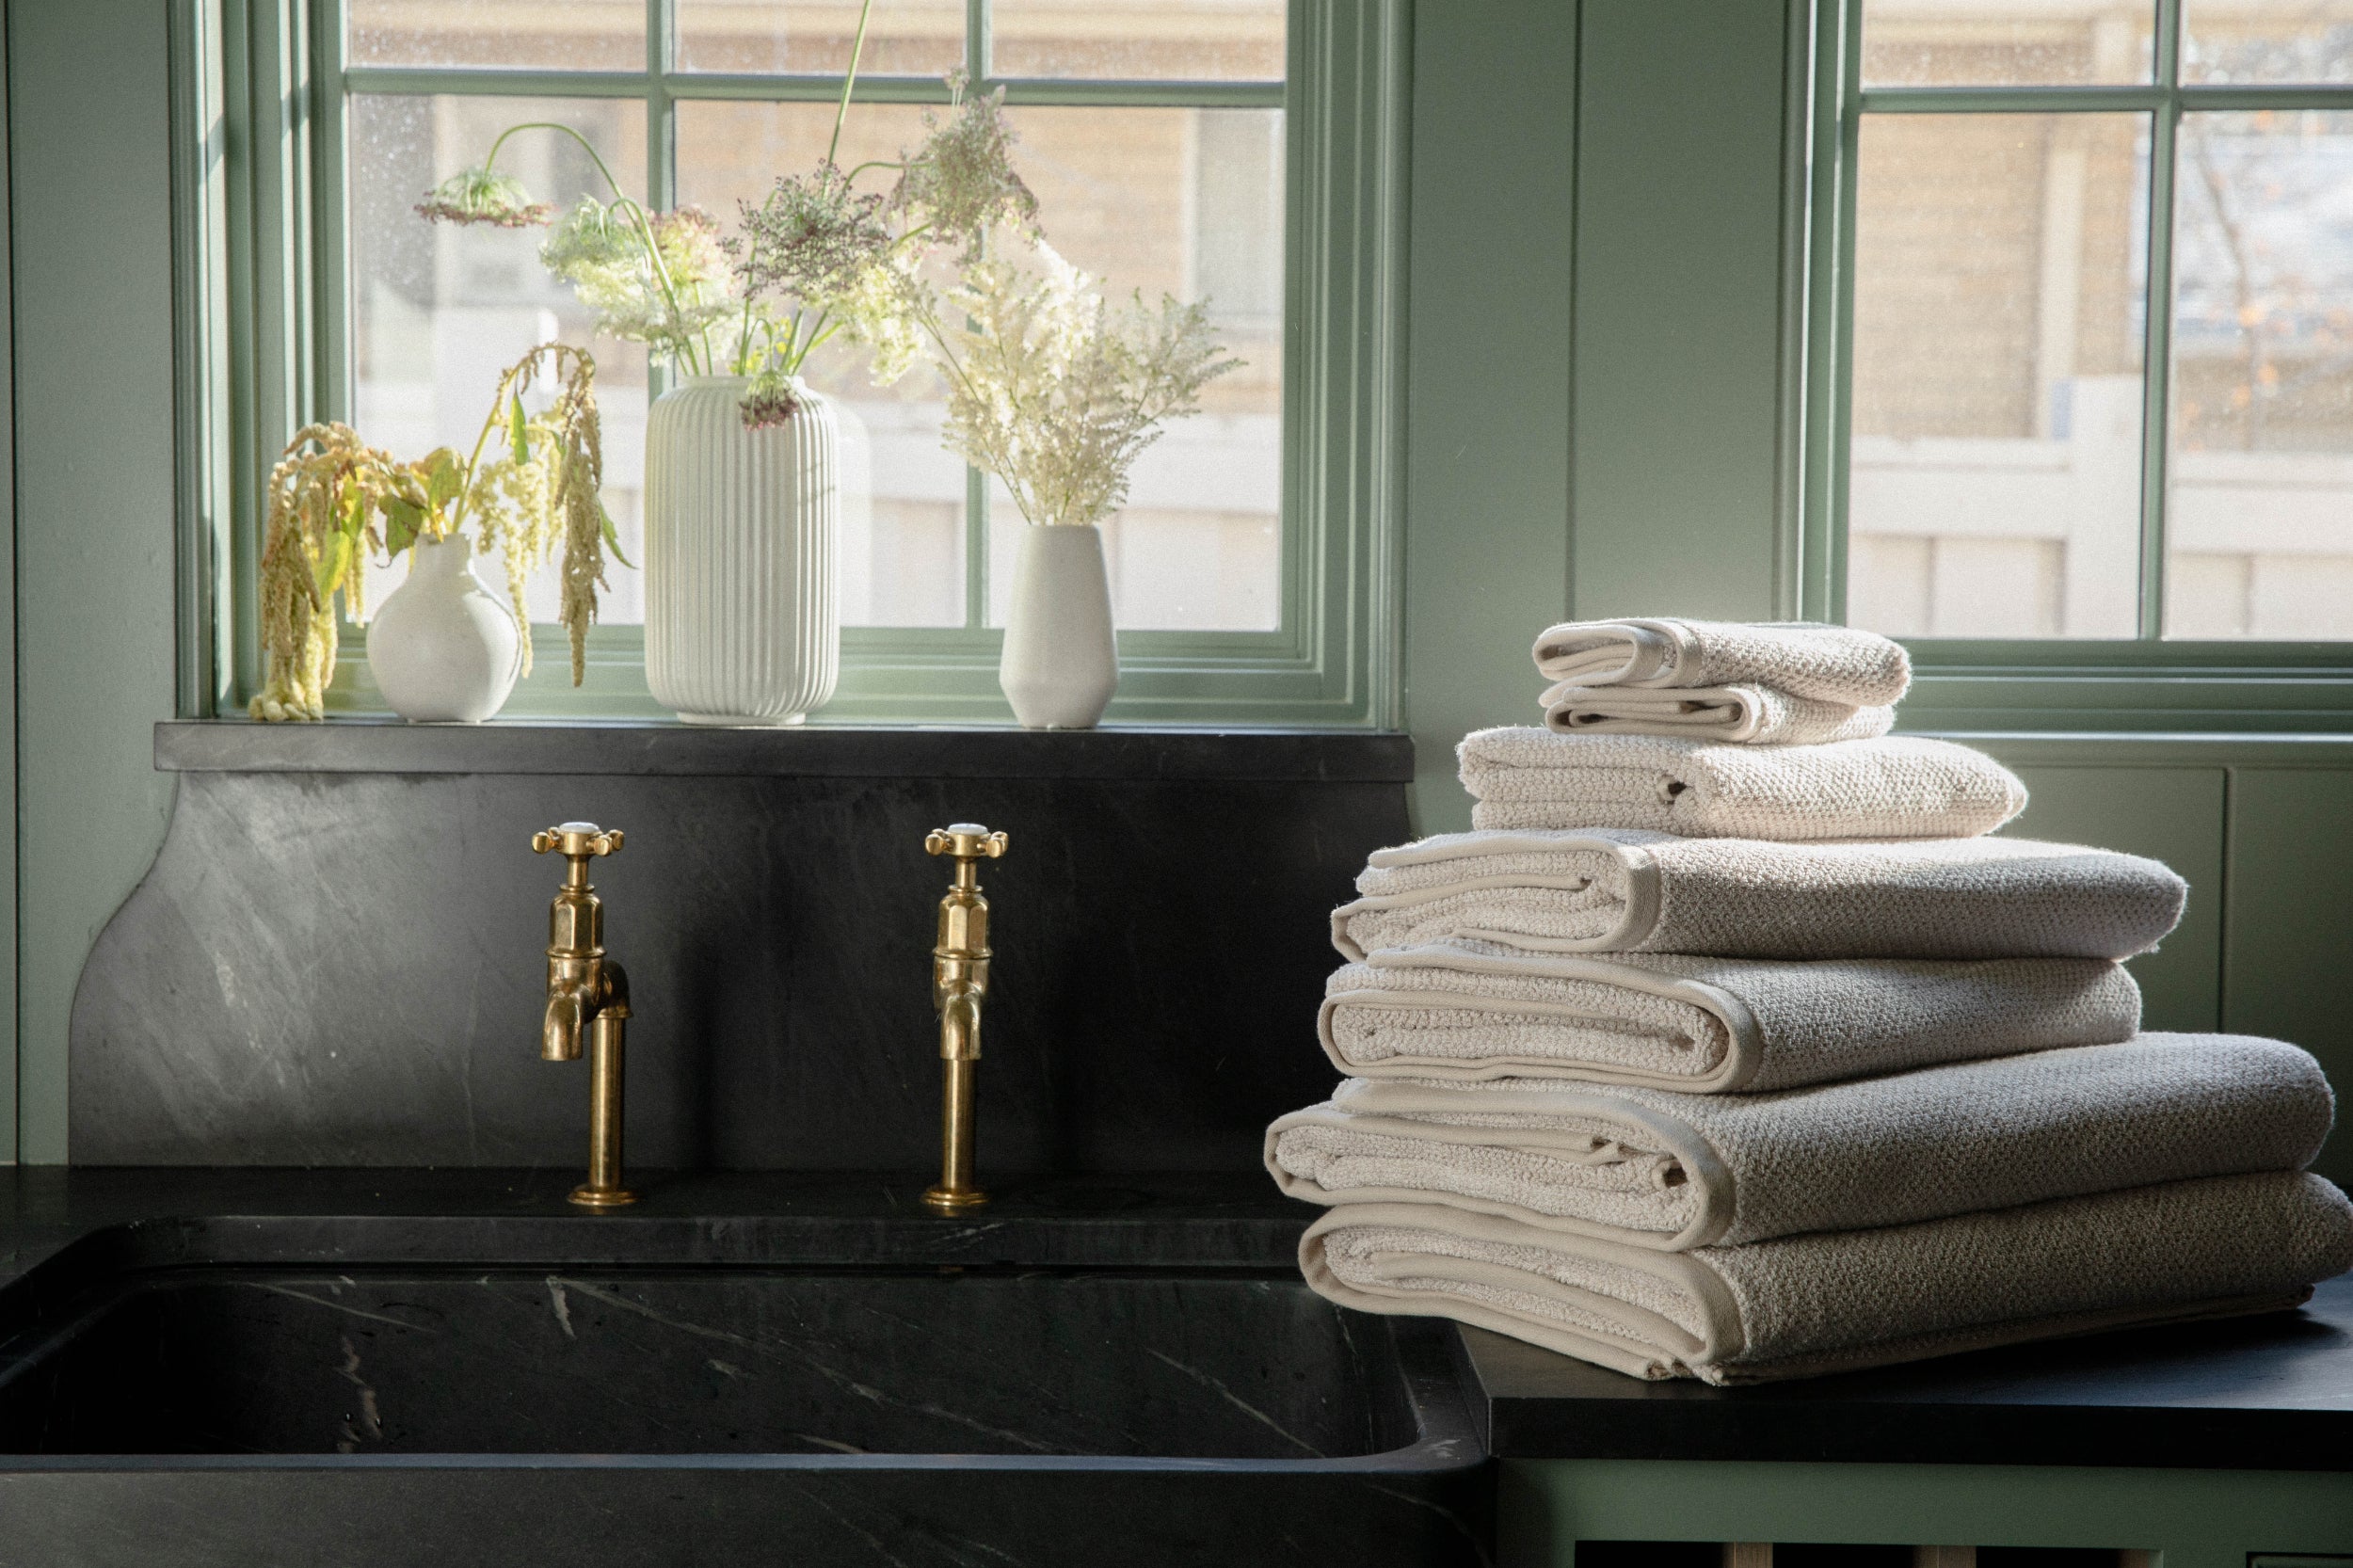 Nantucket Bath bundle on counter next to black sink with gold hardware